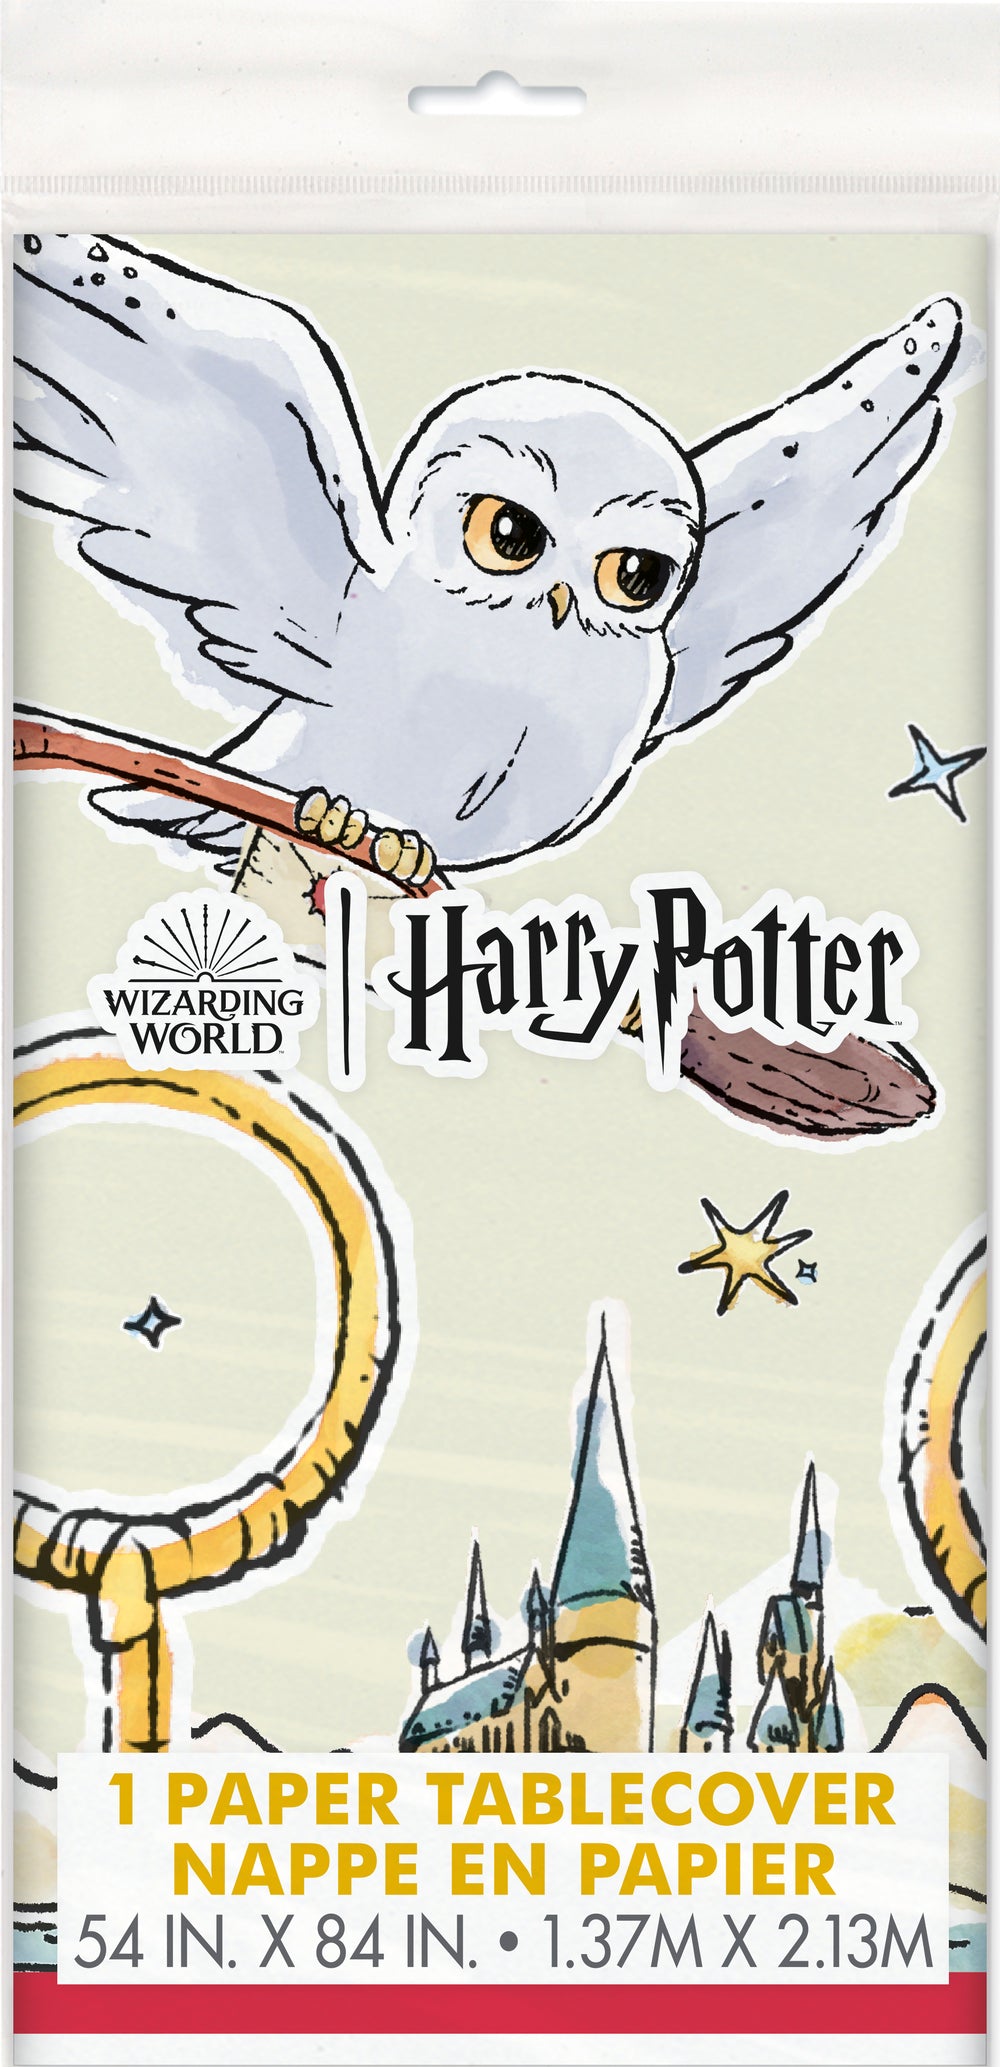 Harry Potter paper tablecover with measuring 54 inches by 84 inches